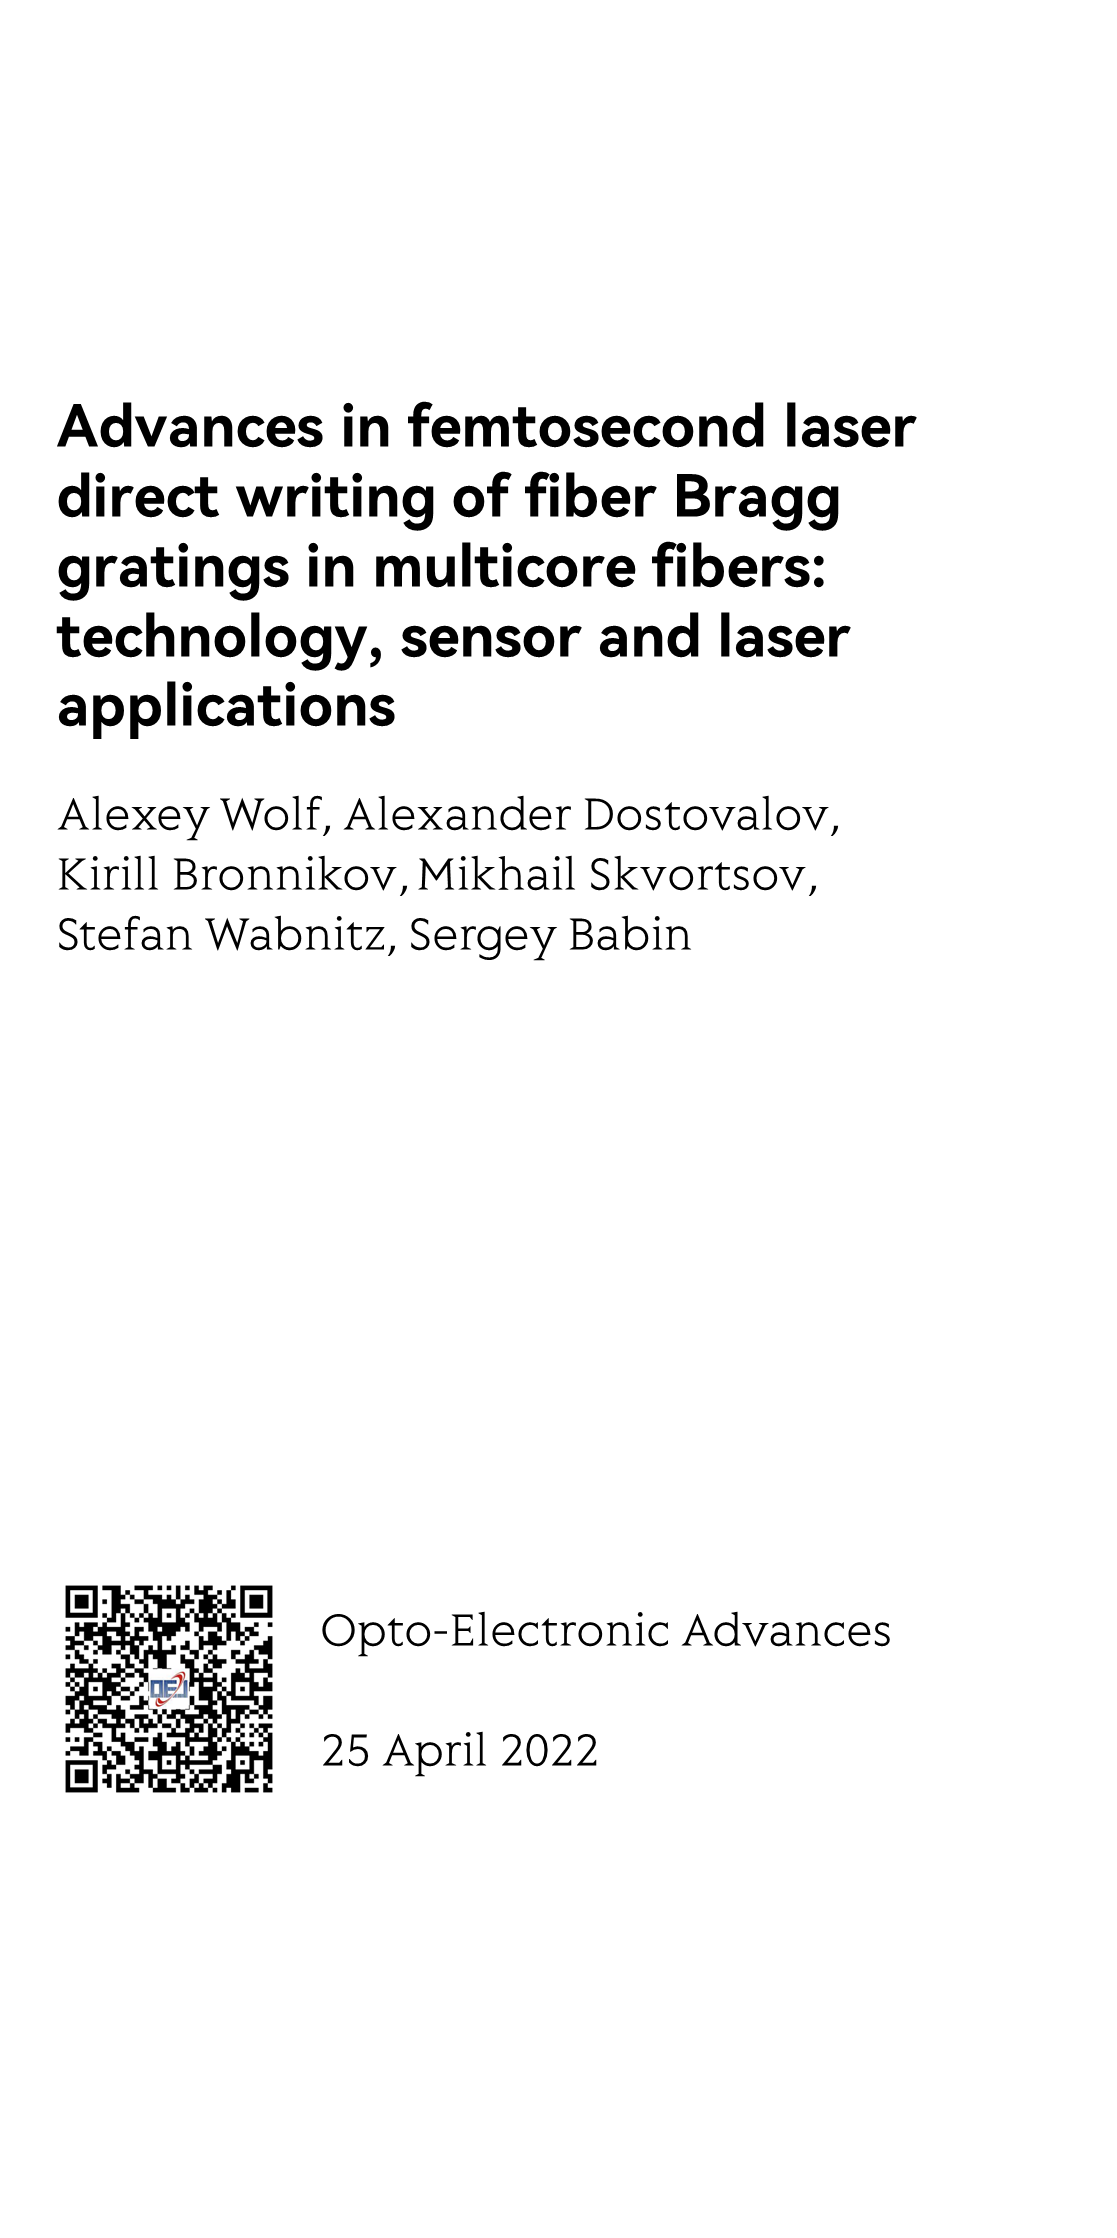 Advances in femtosecond laser direct writing of fiber Bragg gratings in multicore fibers: technology, sensor and laser applications_1